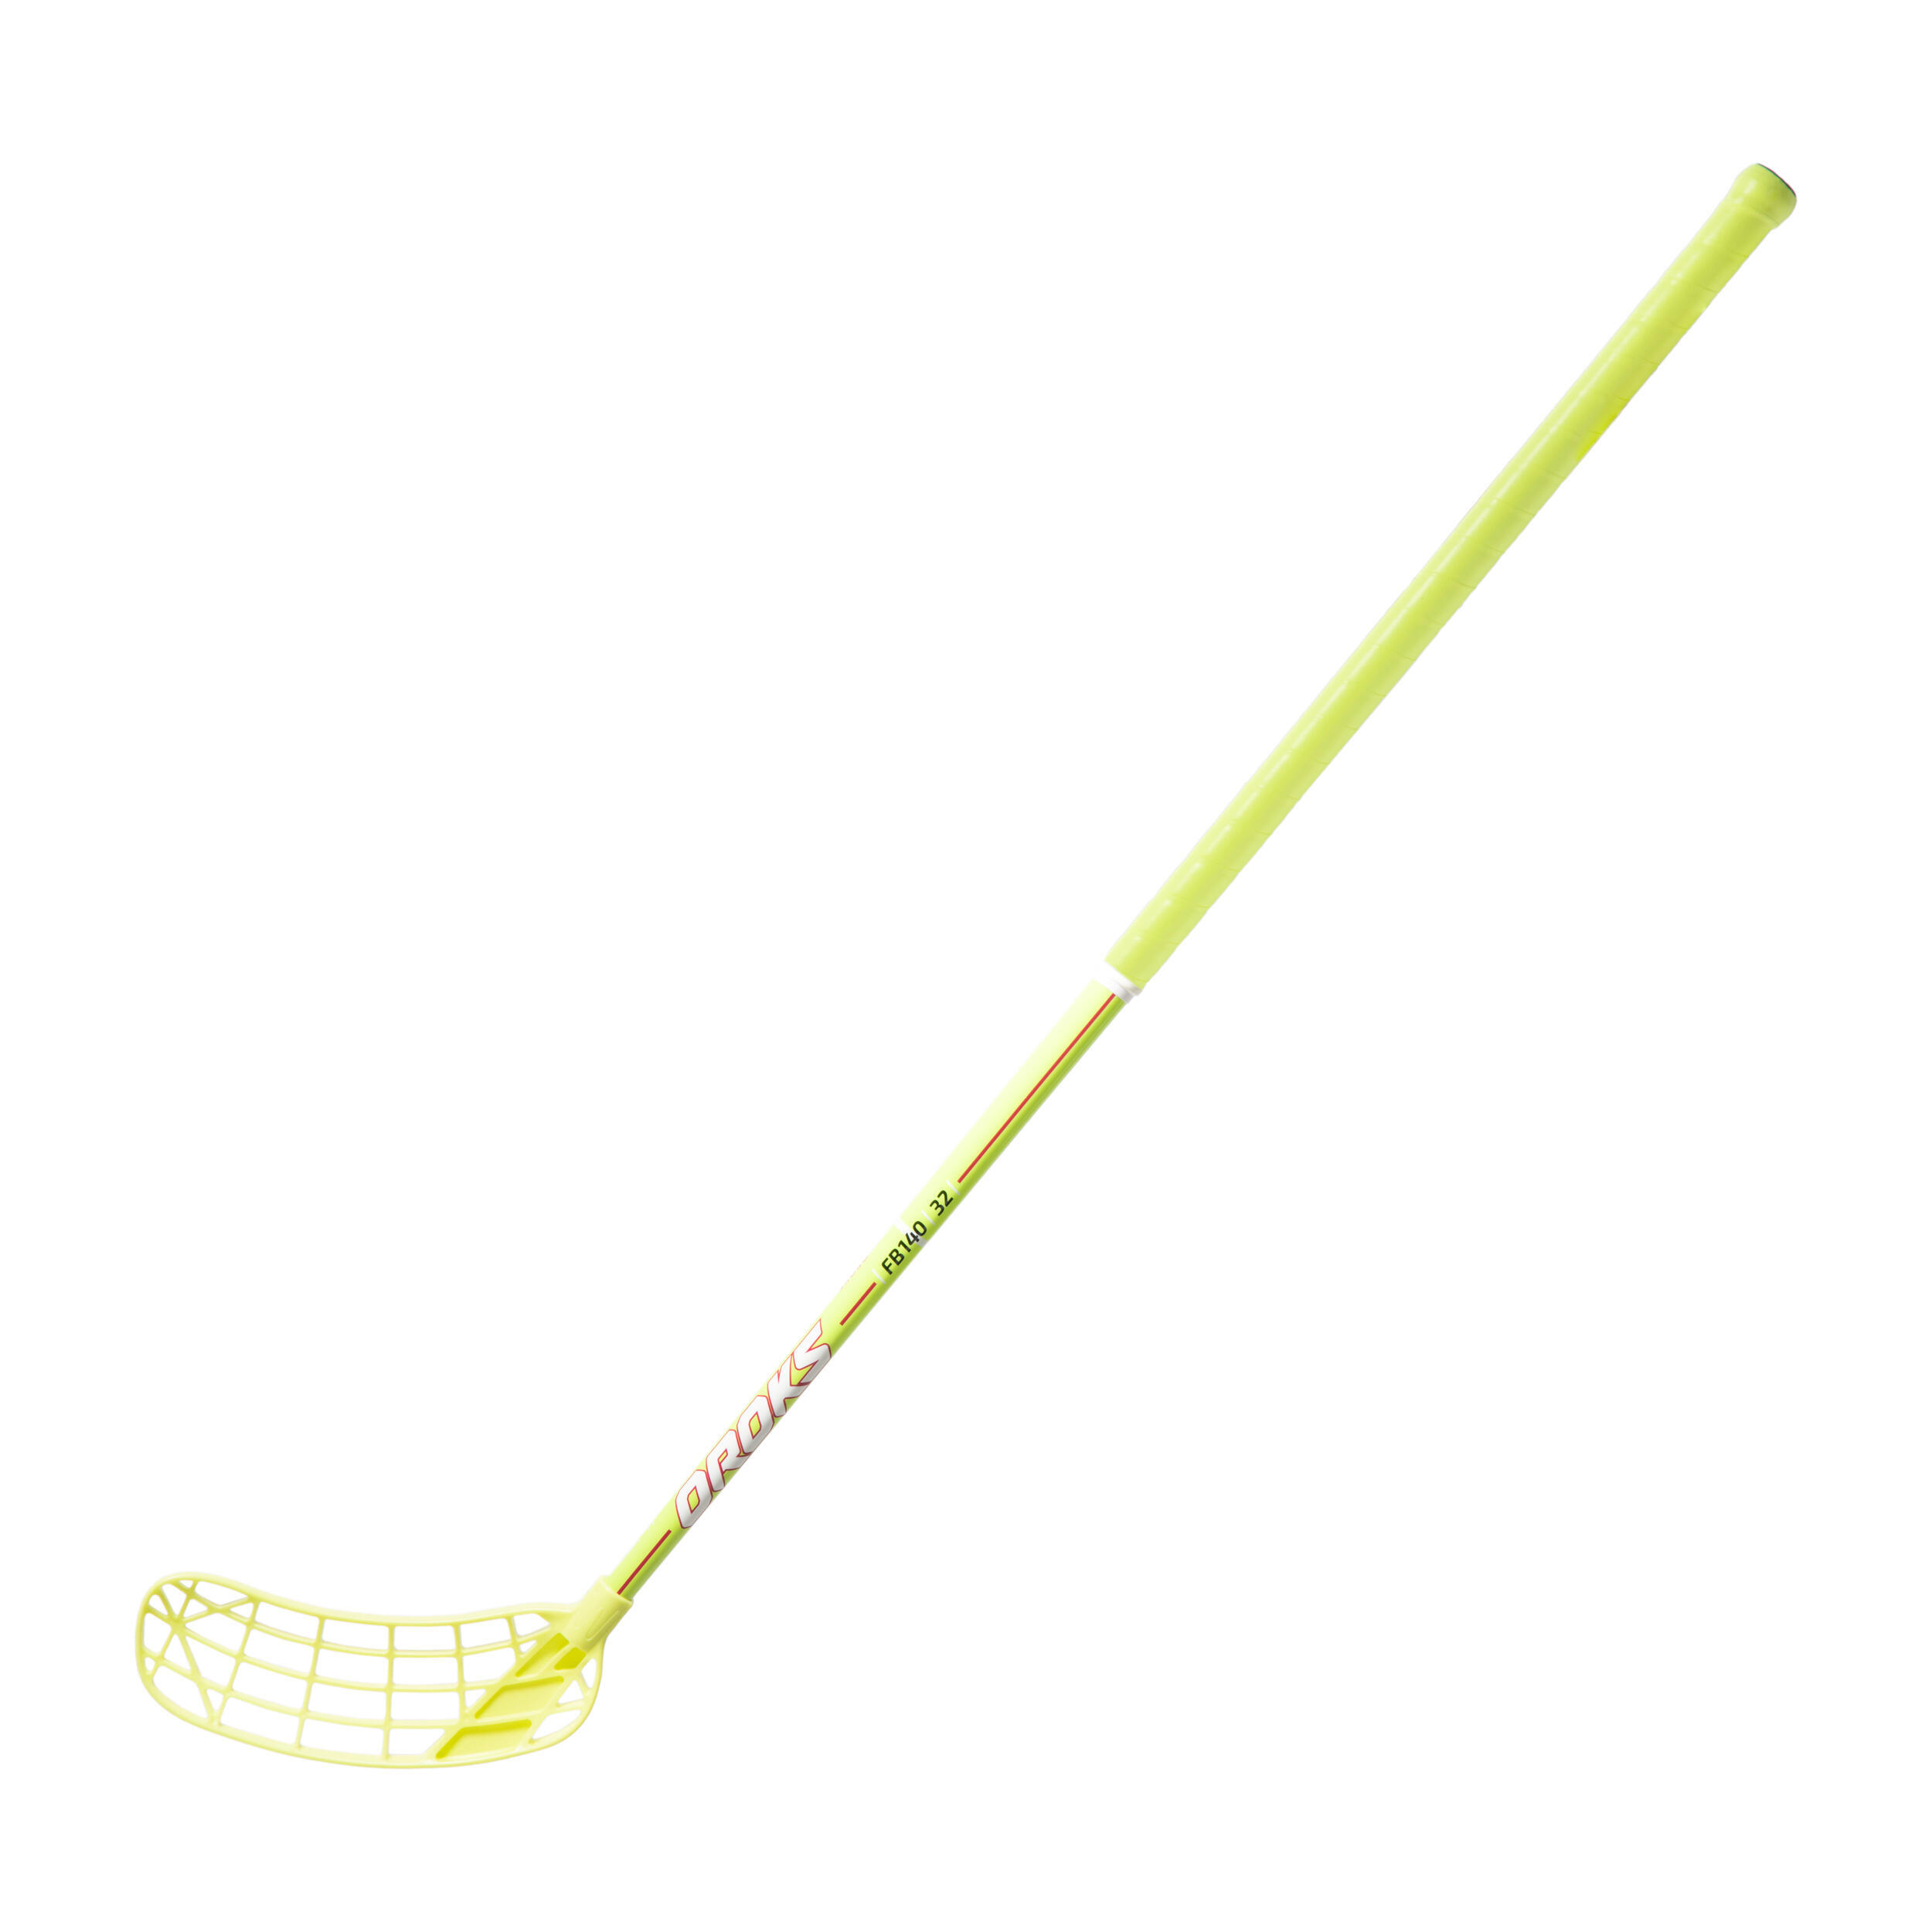 OROKS Floorball Stick for Right-Handed Players FB 140